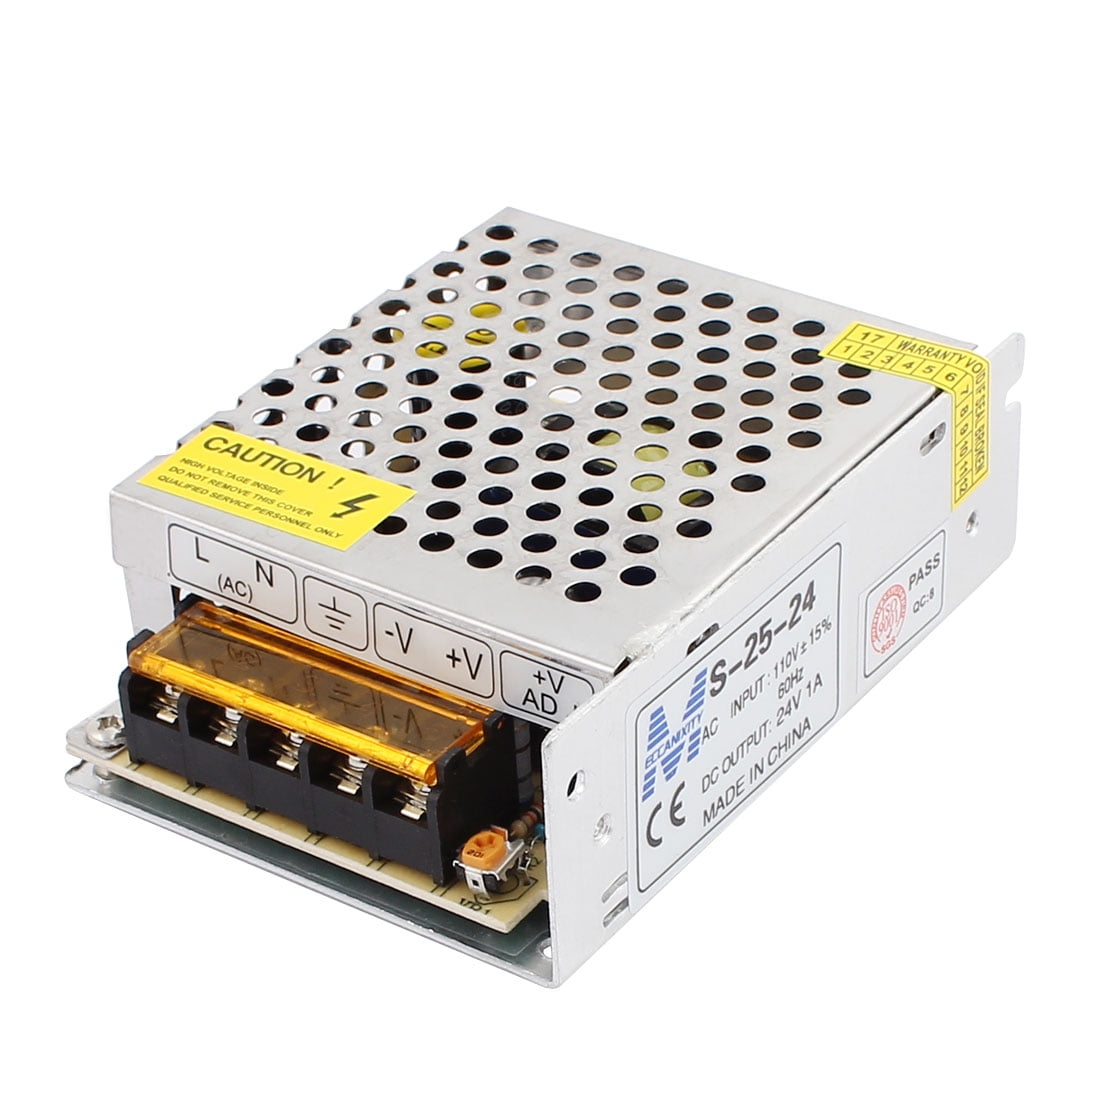 S-25-24 Switching Power Supply Output DC 24V 1A for Lighting Display